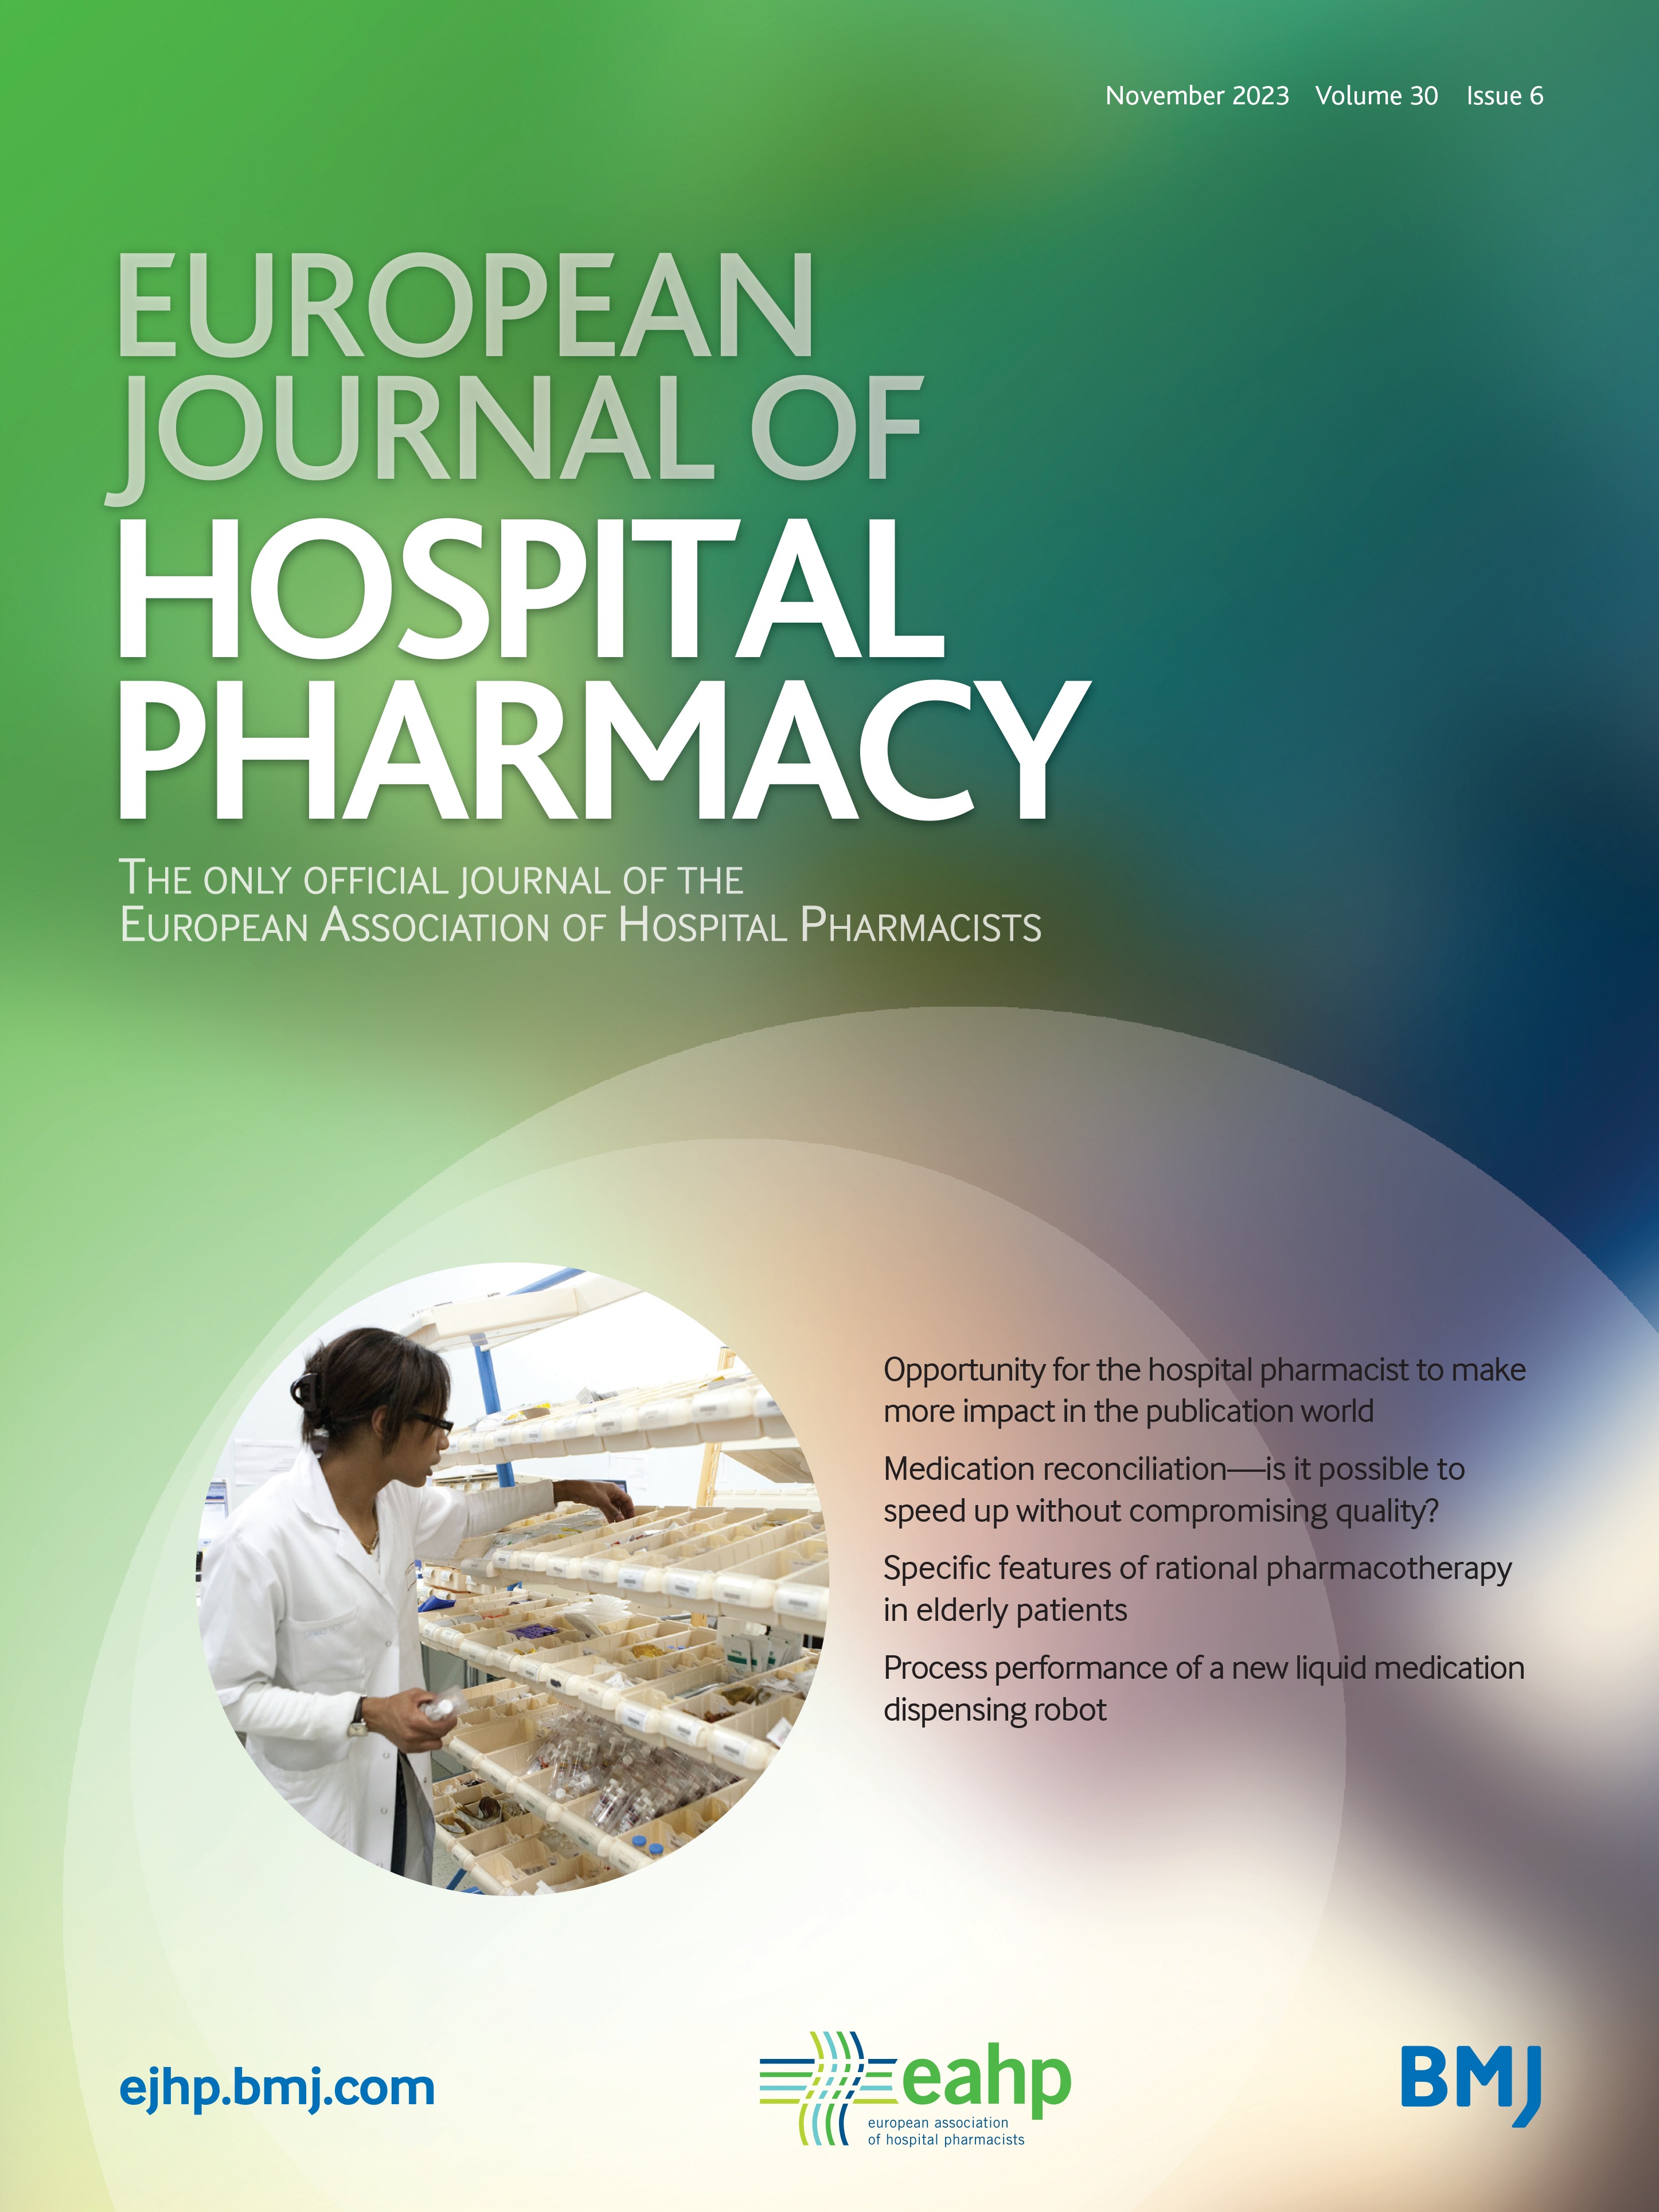 The Granada Statements: An opportunity for the hospital pharmacist to make more impact in the publication world, part 2